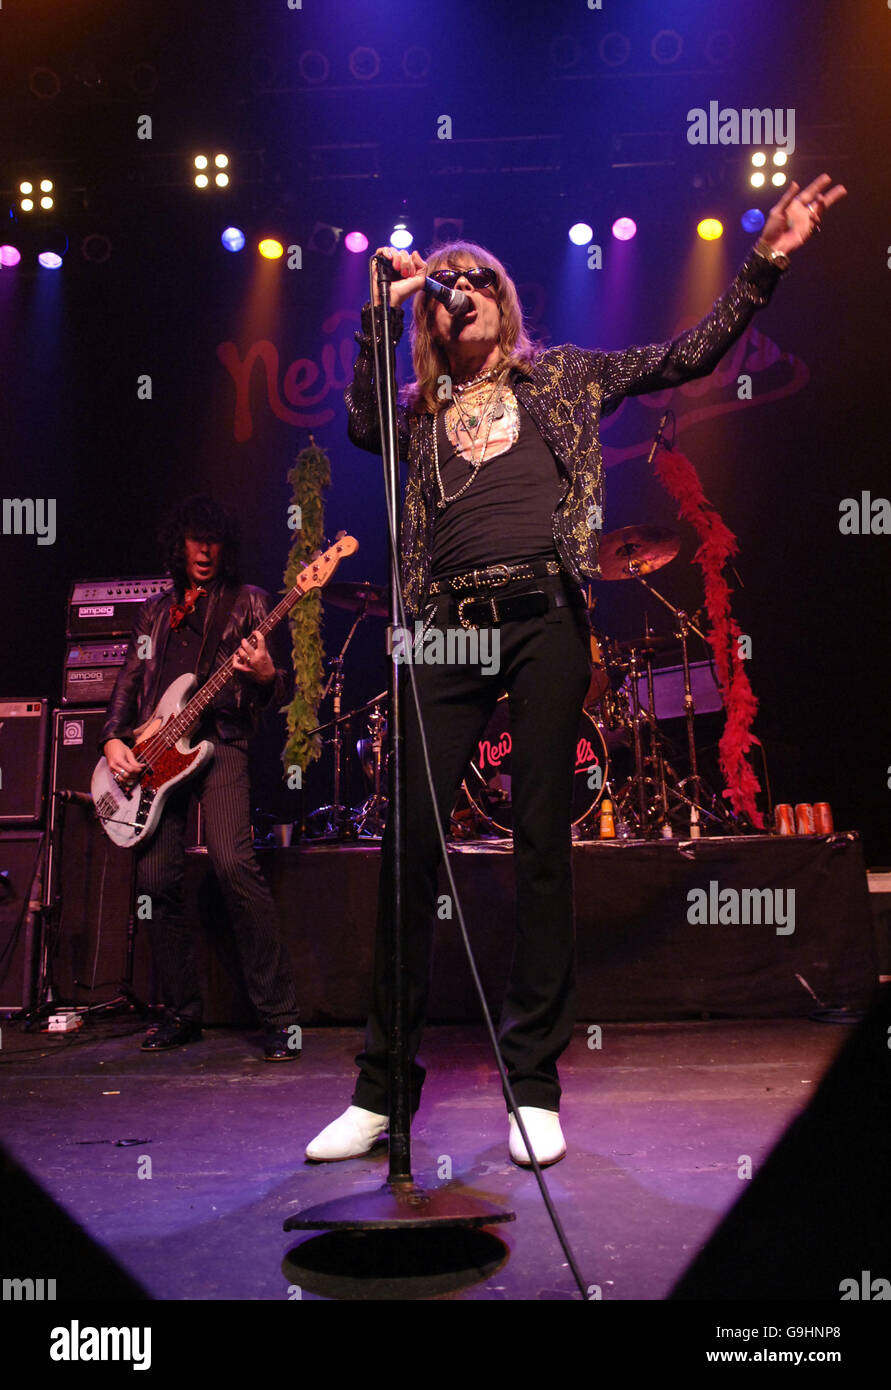 David Johansen of The New York Dolls performs on stage at The Forum in north London. Picture date: Sunday October 22, 2006.. Photo credit should read: Yui Mok/PA Stock Photo